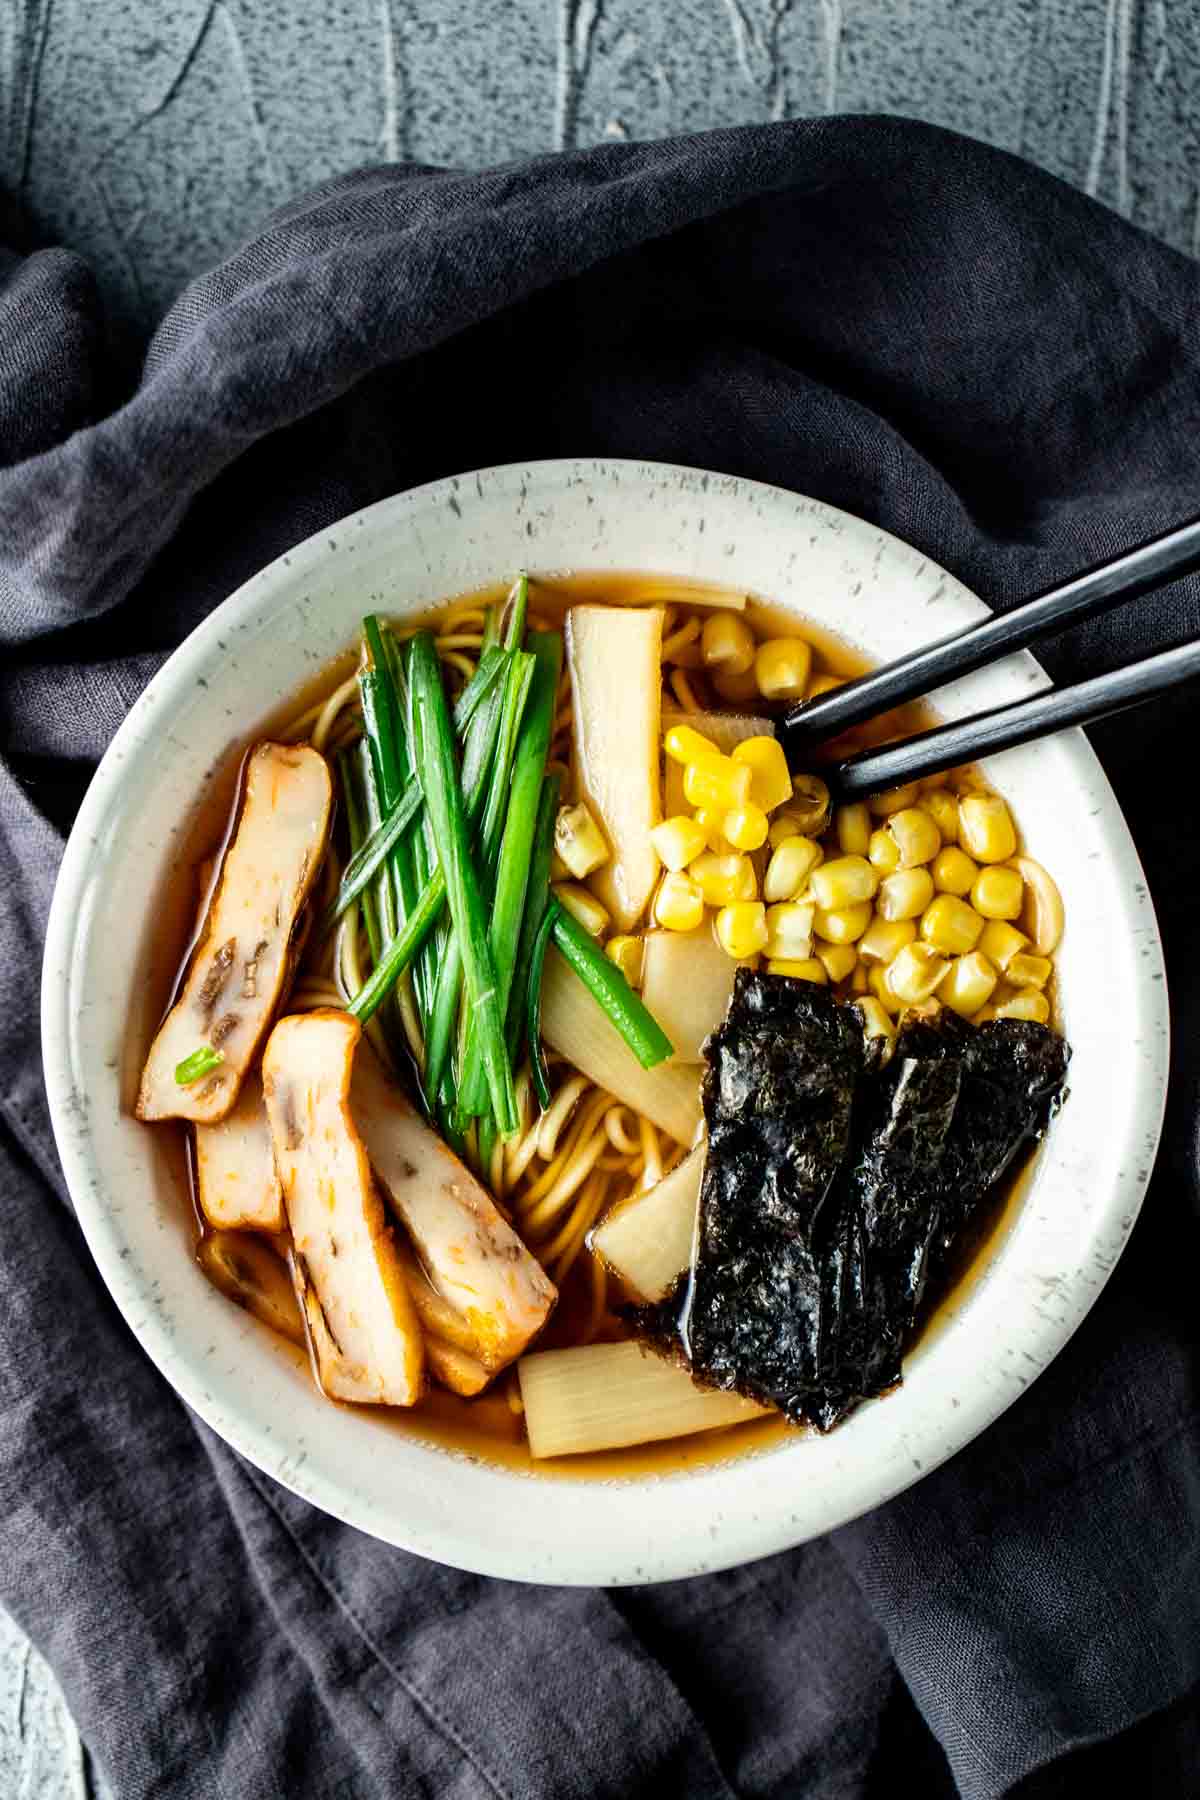 Noodle soupw ith corn, green onions, bamboo shoots and fish cake